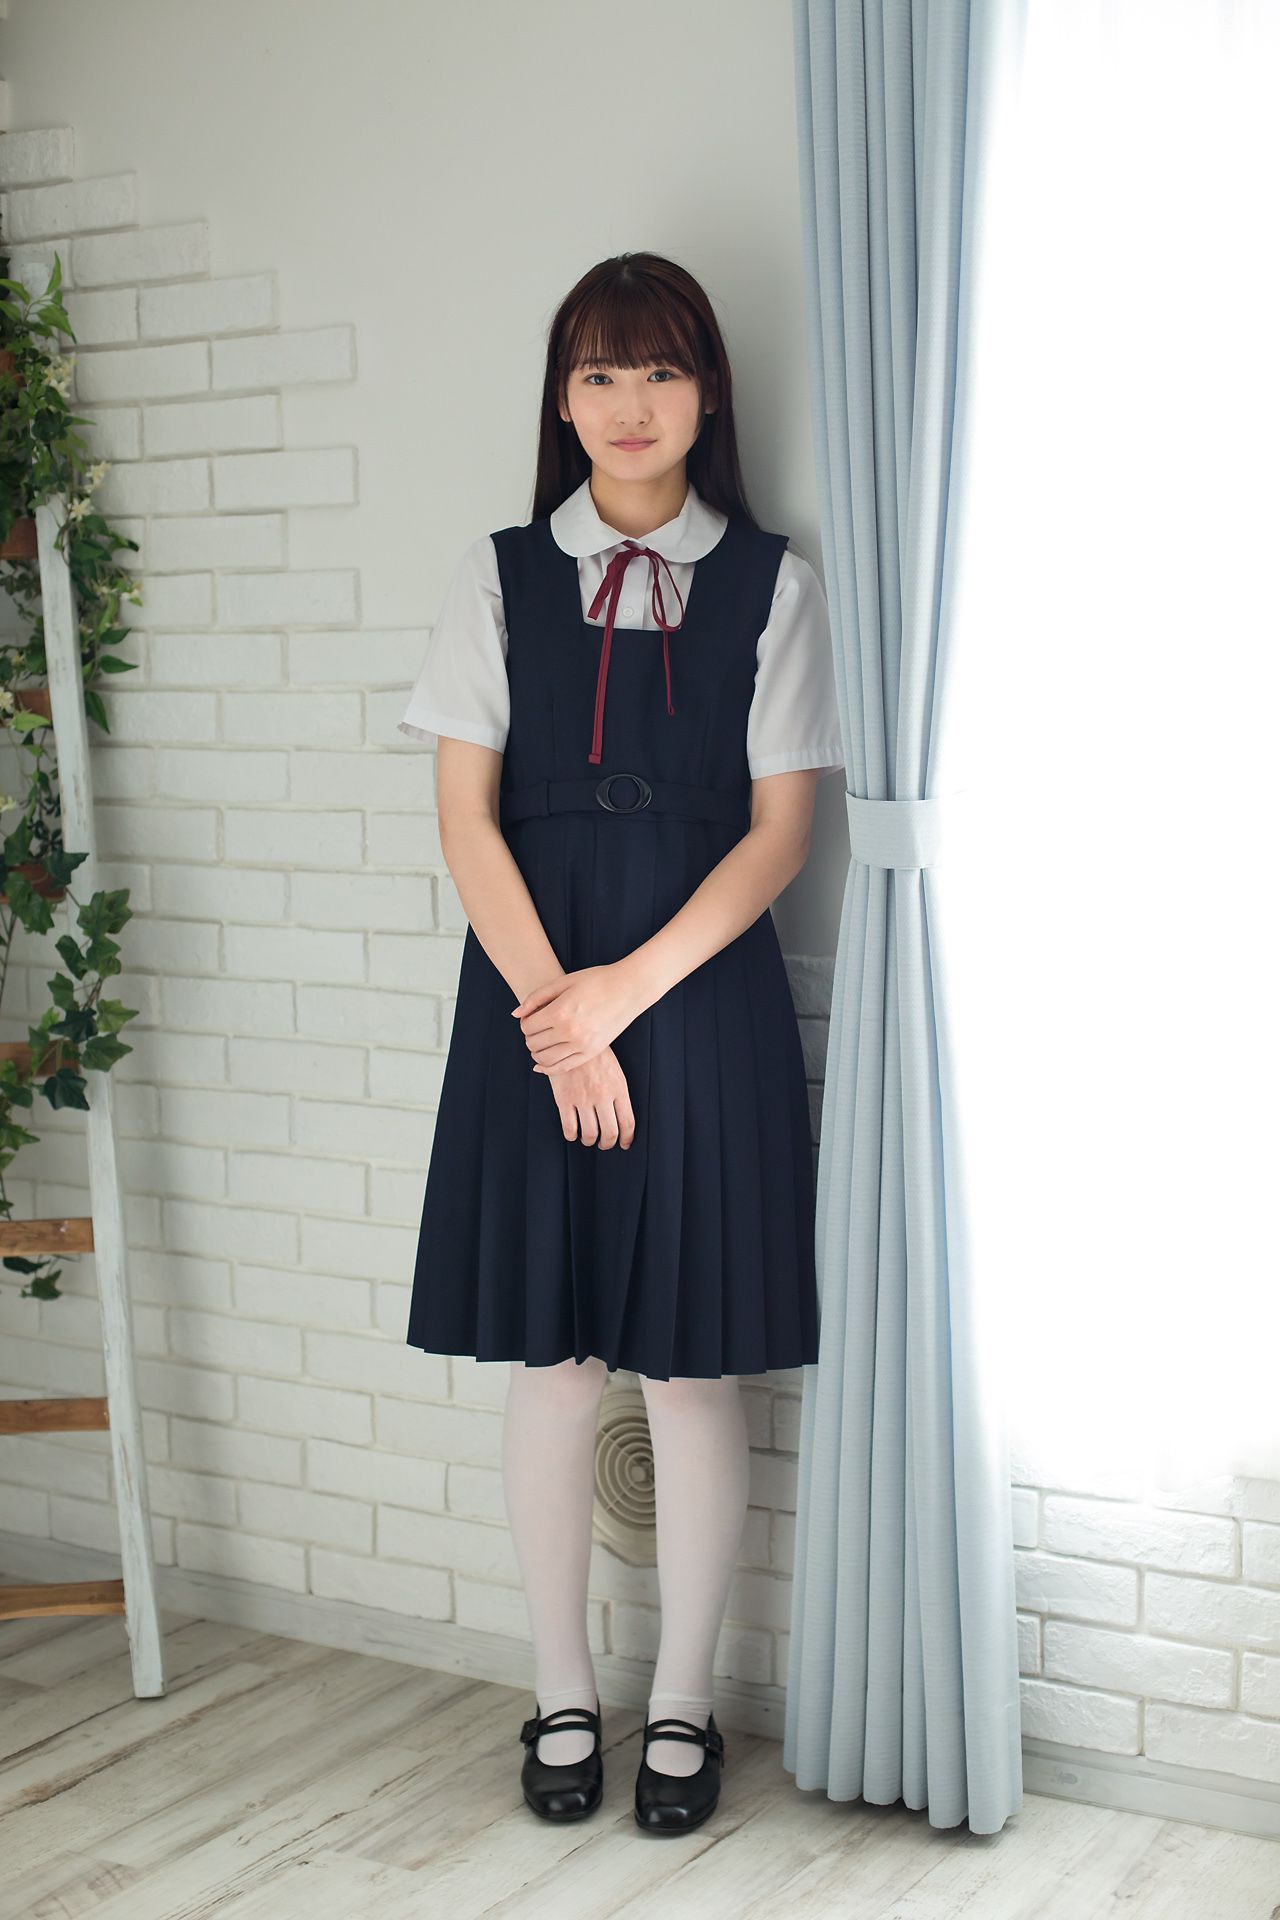 [Minisuka.tv] 近藤あさみ 白丝学生装 - Limited Gallery 18.1[33](第4页)